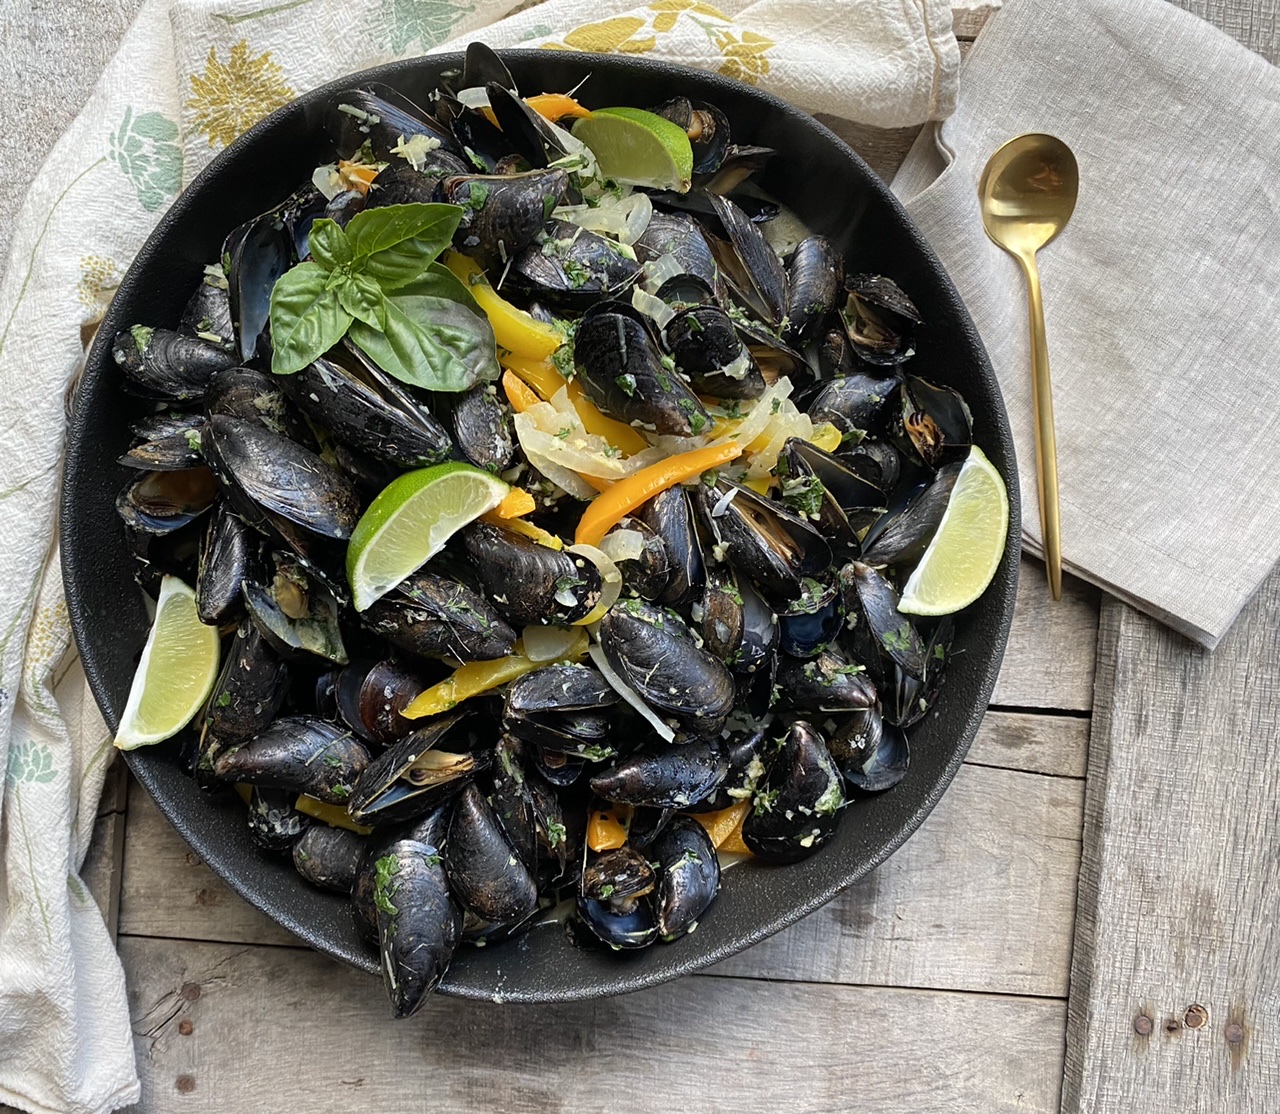 79BAA310 10C6 43AC B035 C0E6CF2FF892 - Green Curry Lemongrass Mussels with Peppers & Onions